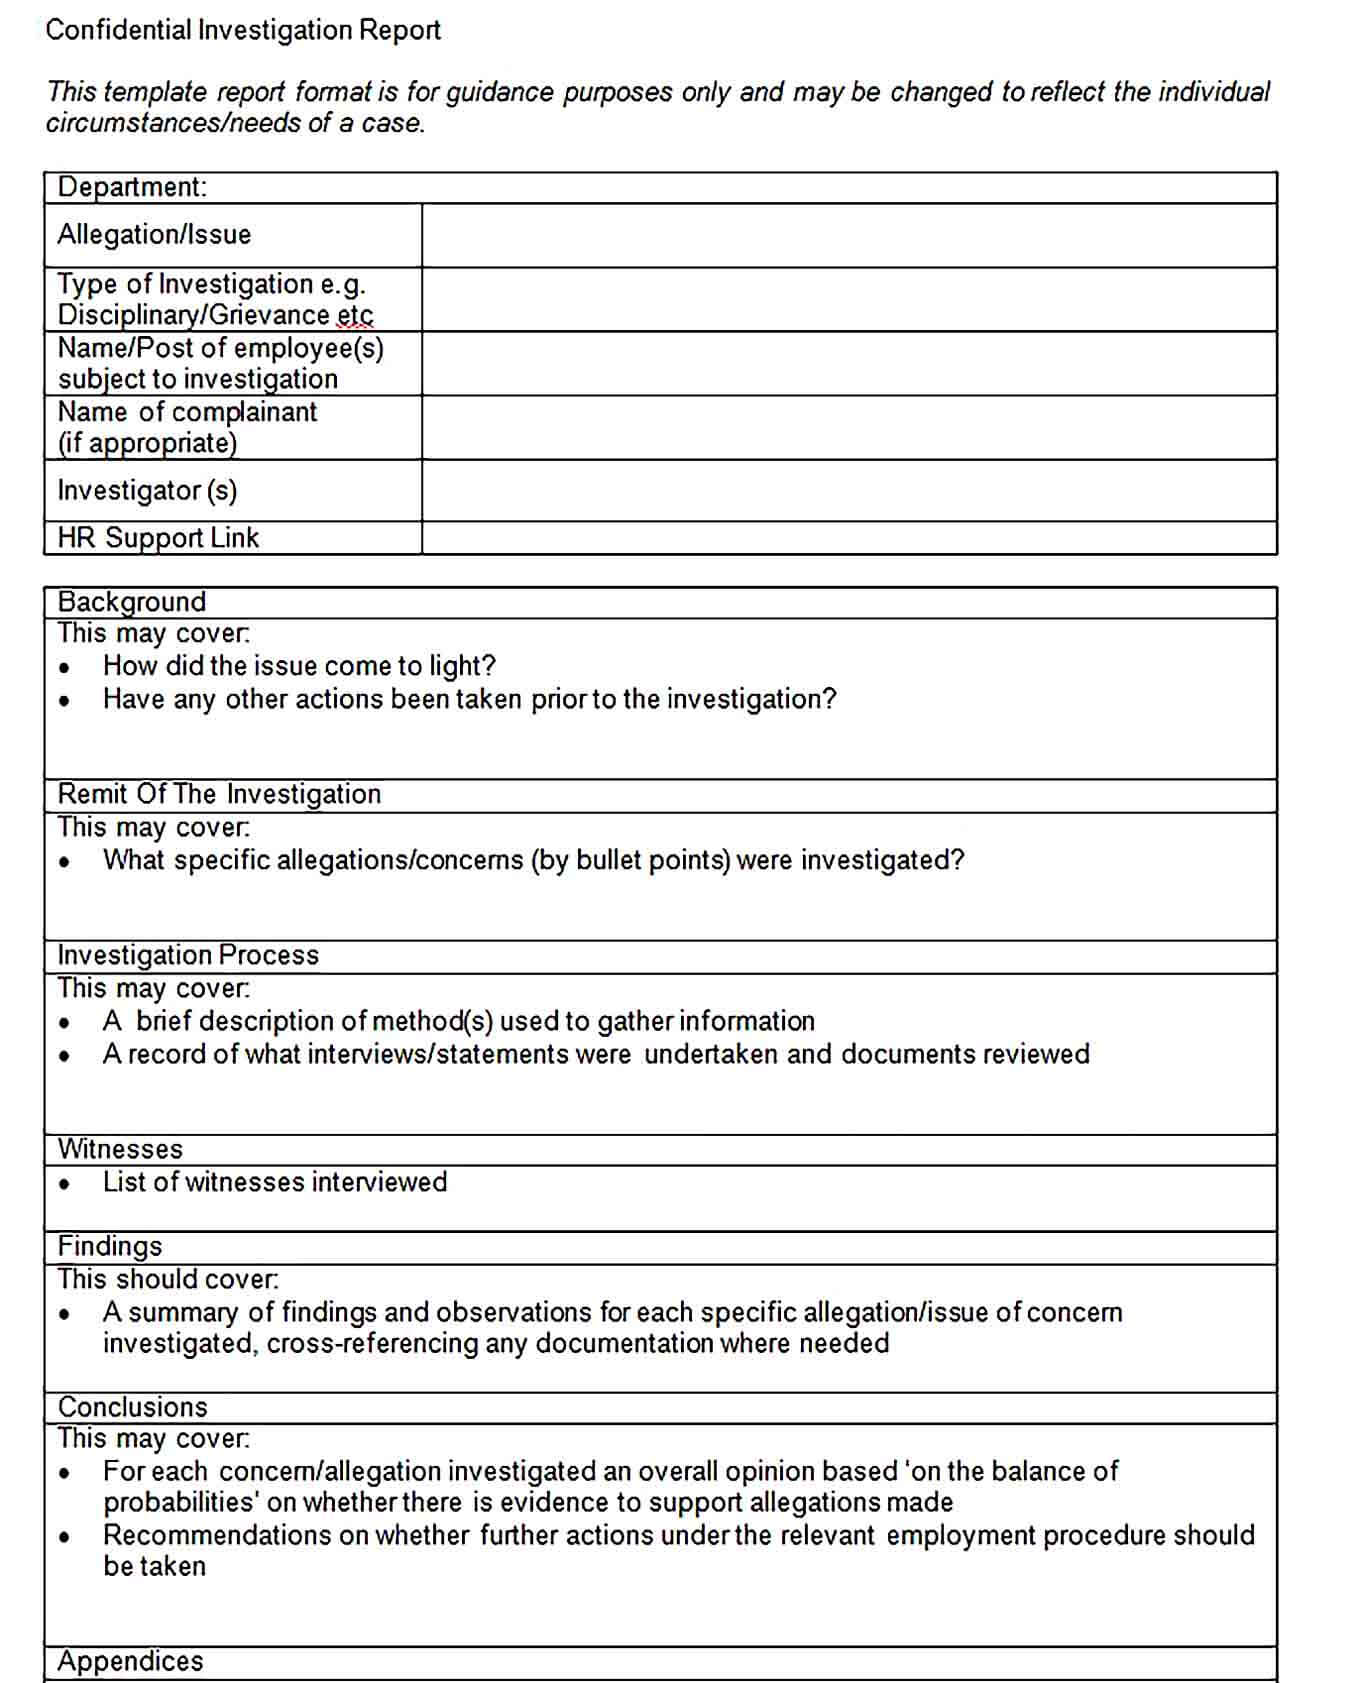 Sample Confidential Investigation Report Form Template